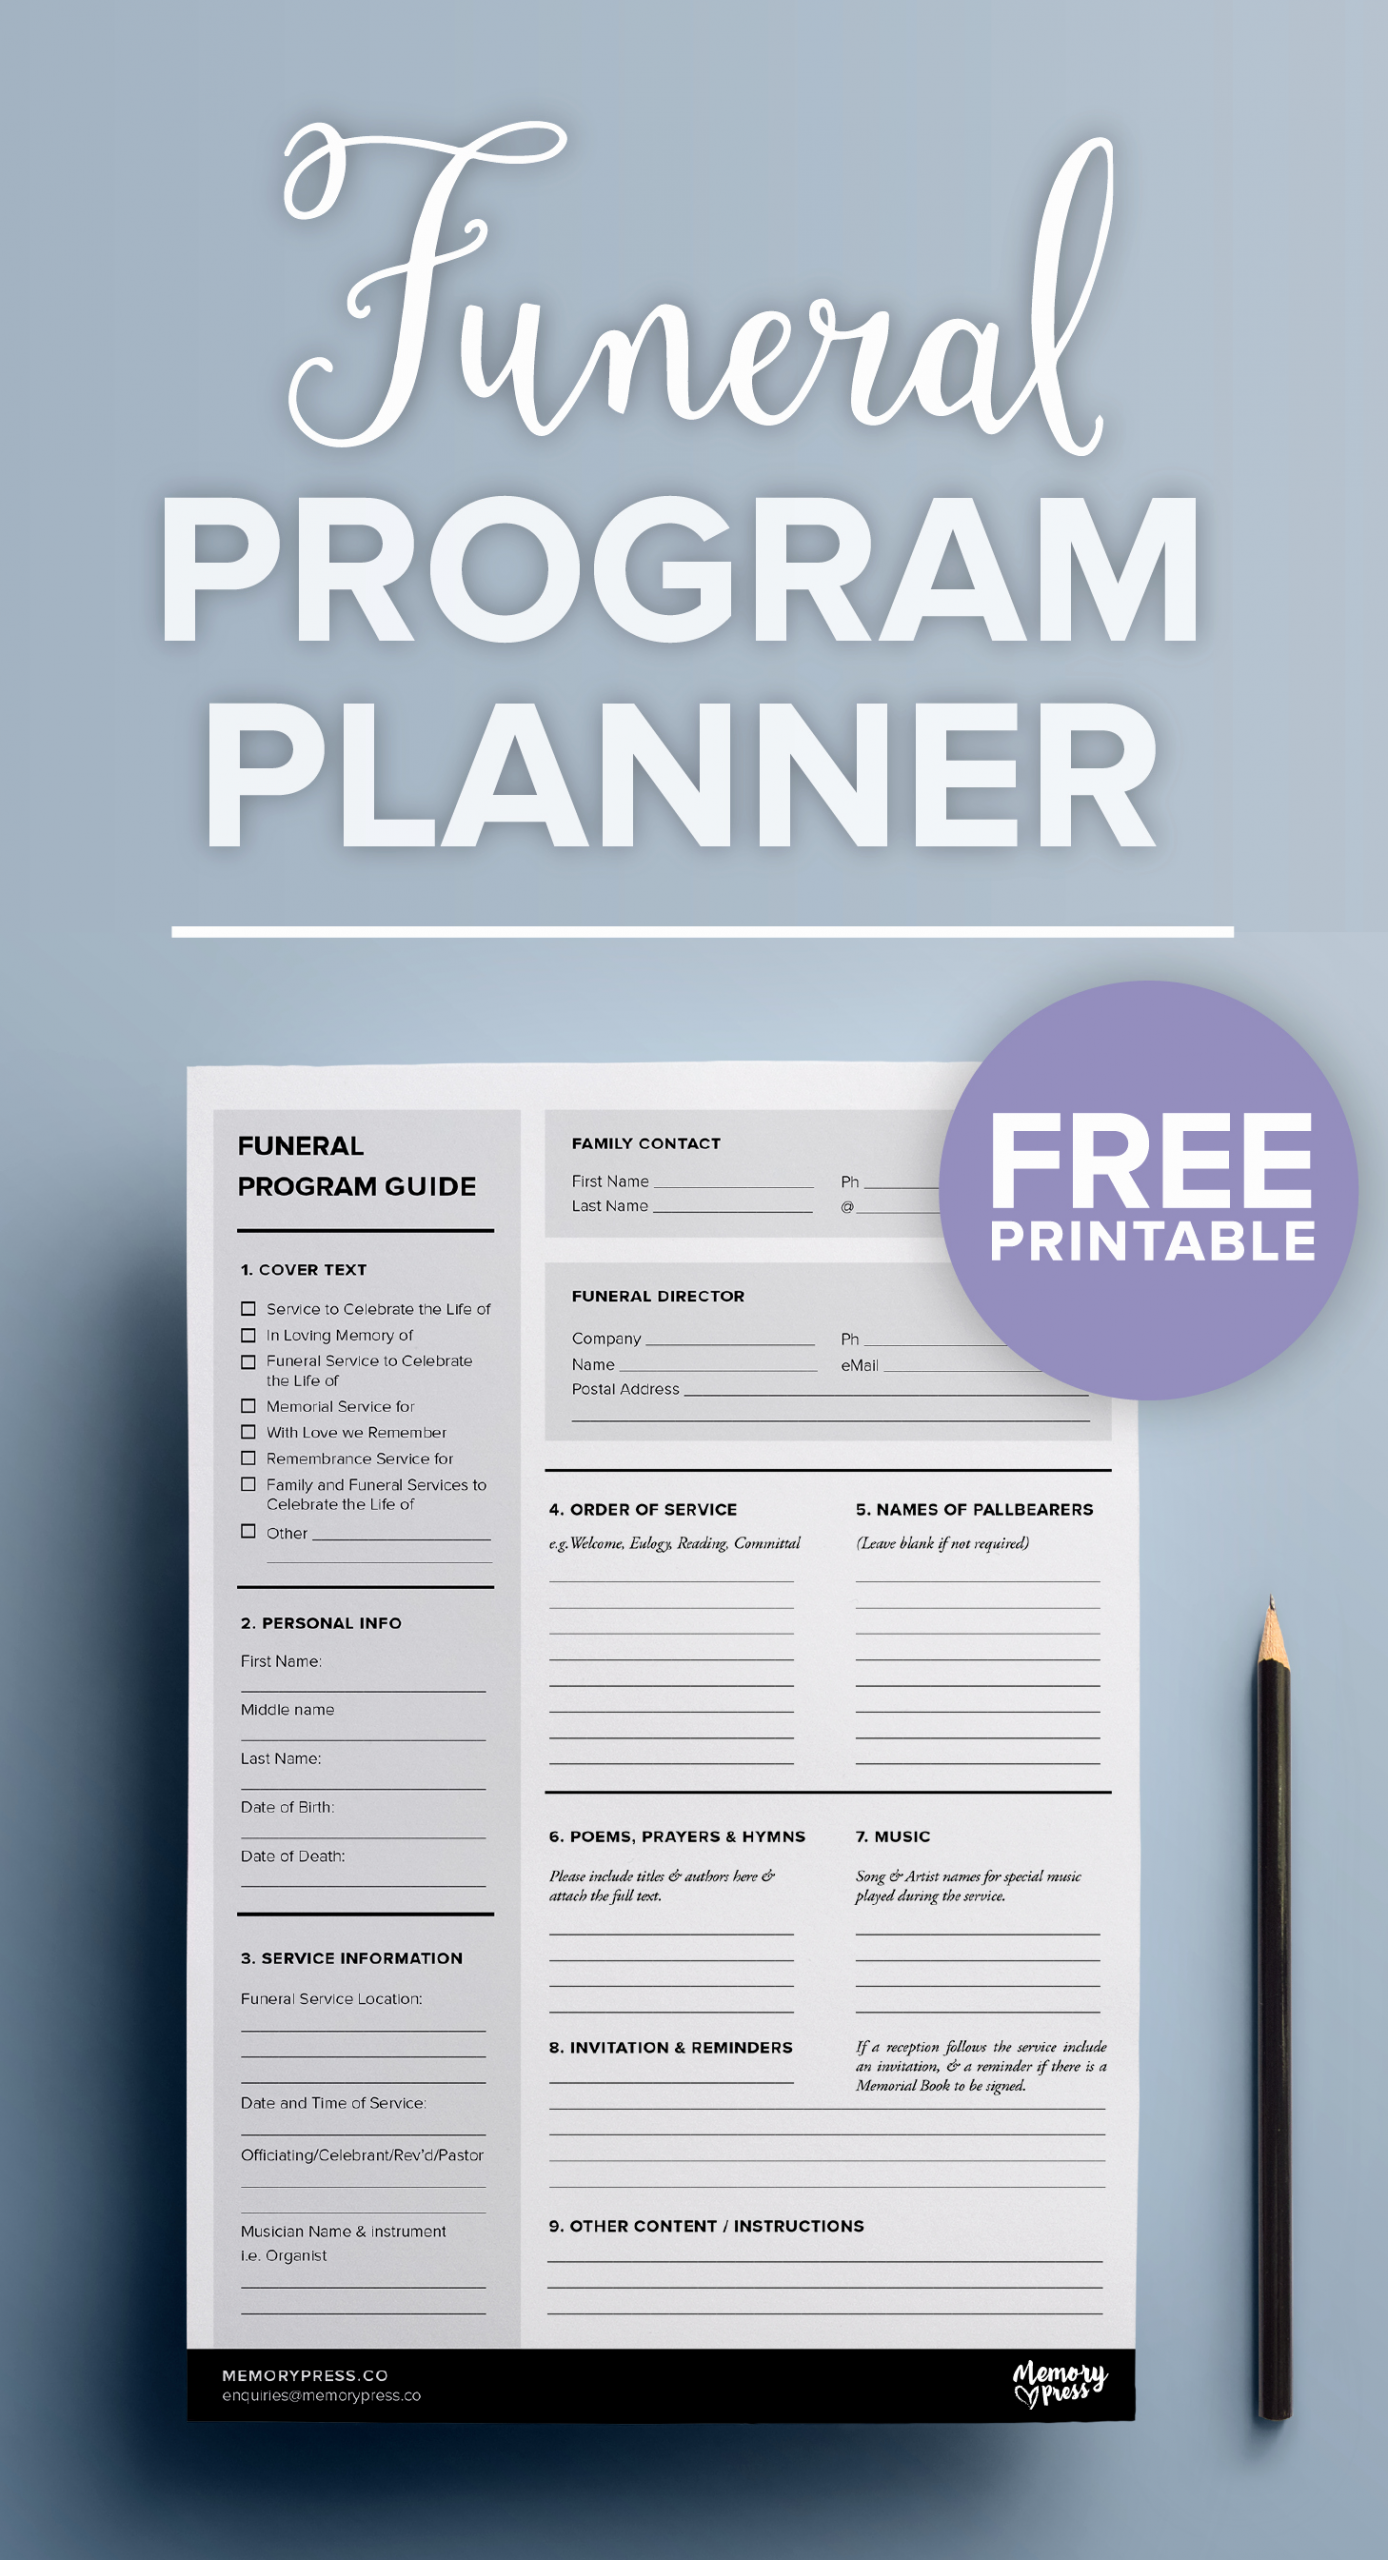 Funeral Planning Checklist Template New Free Printable Funeral Program Planner